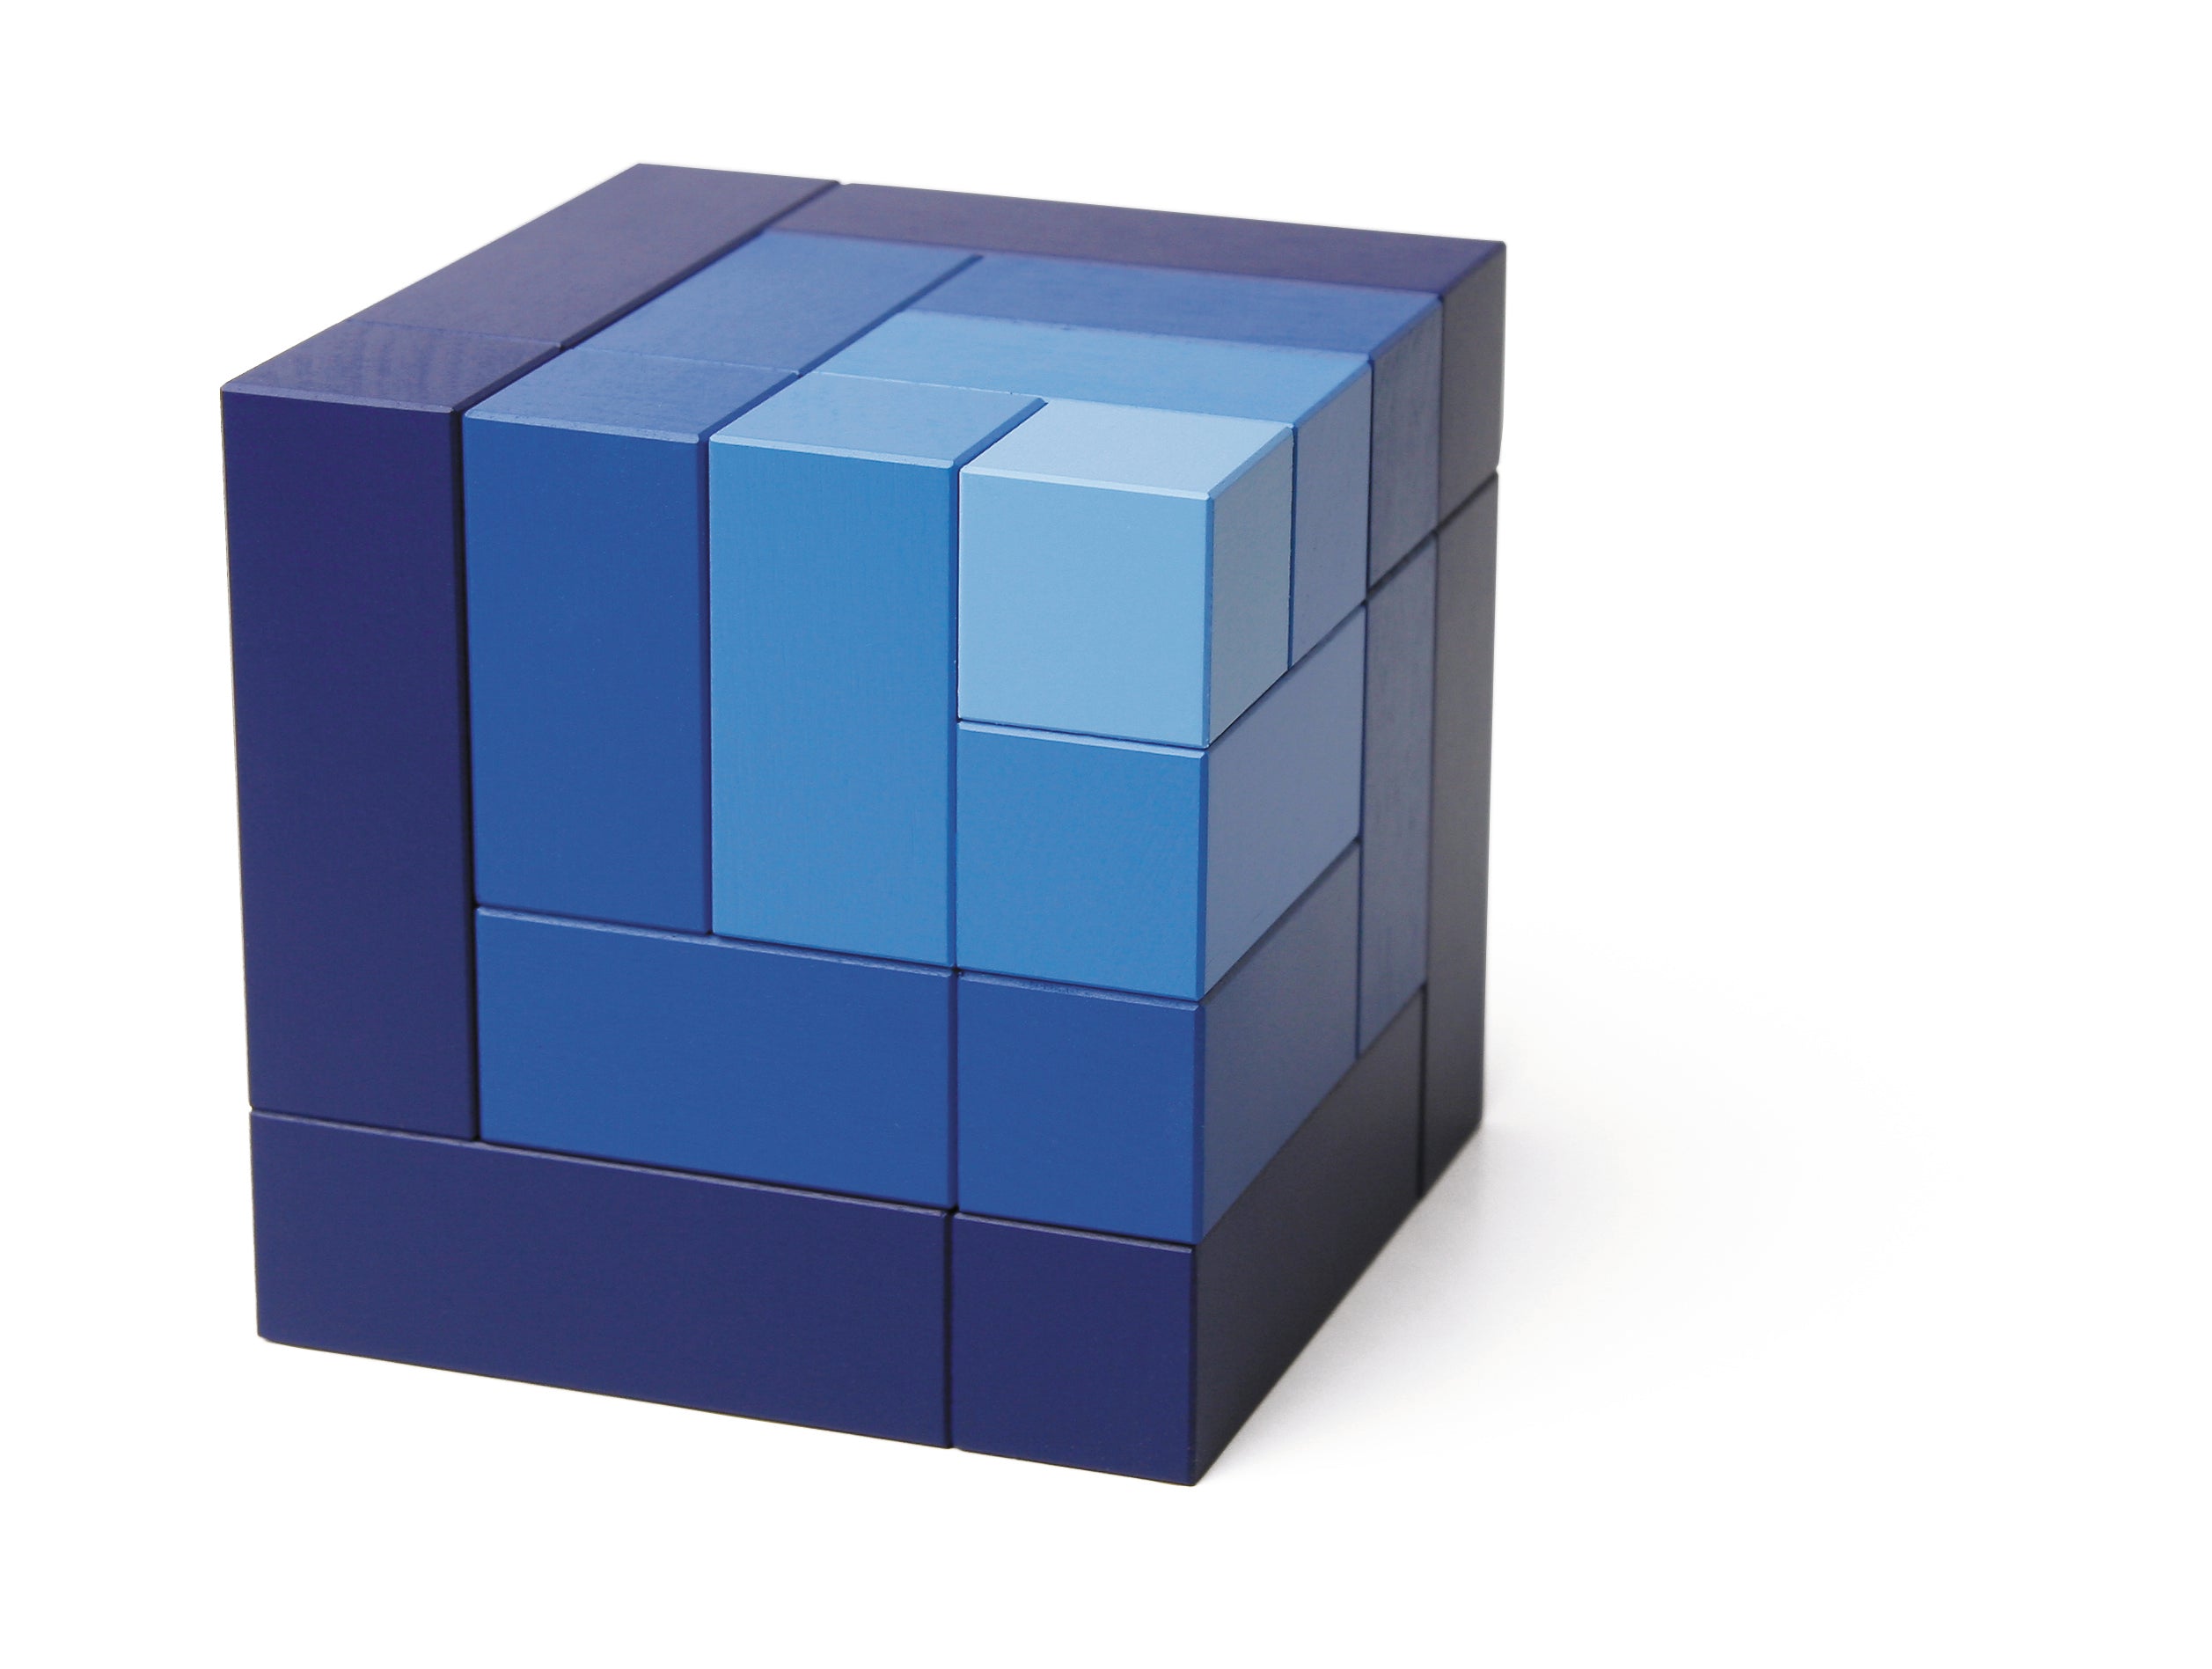 Cubicus blue Wooden Toy by Naef Swiss since 1954